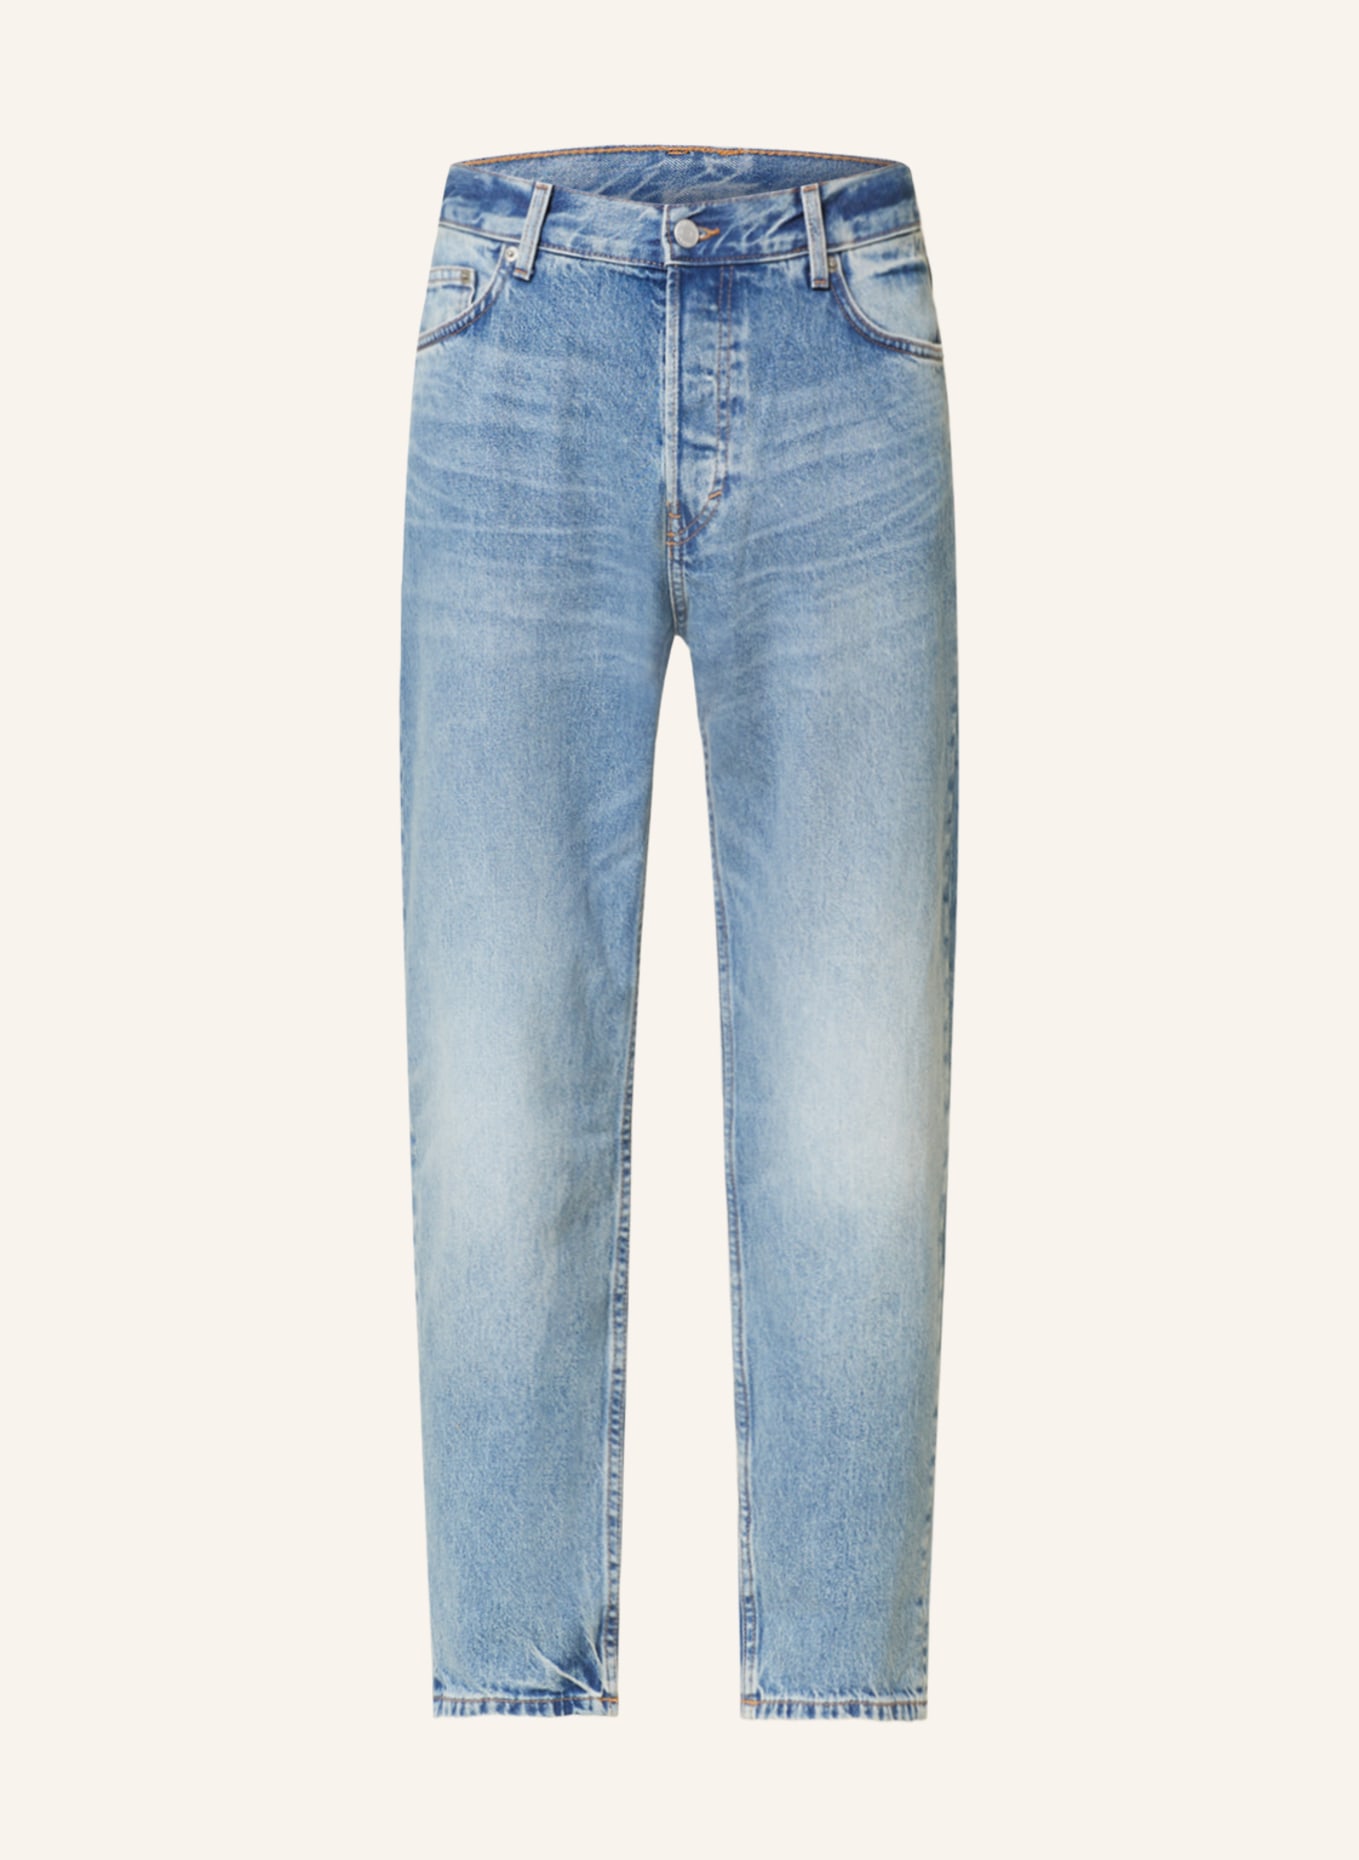 WEEKDAY Jeans BARREL Relaxed Tapered Fit, Farbe: 75-101 Seventeen Blue (Bild 1)